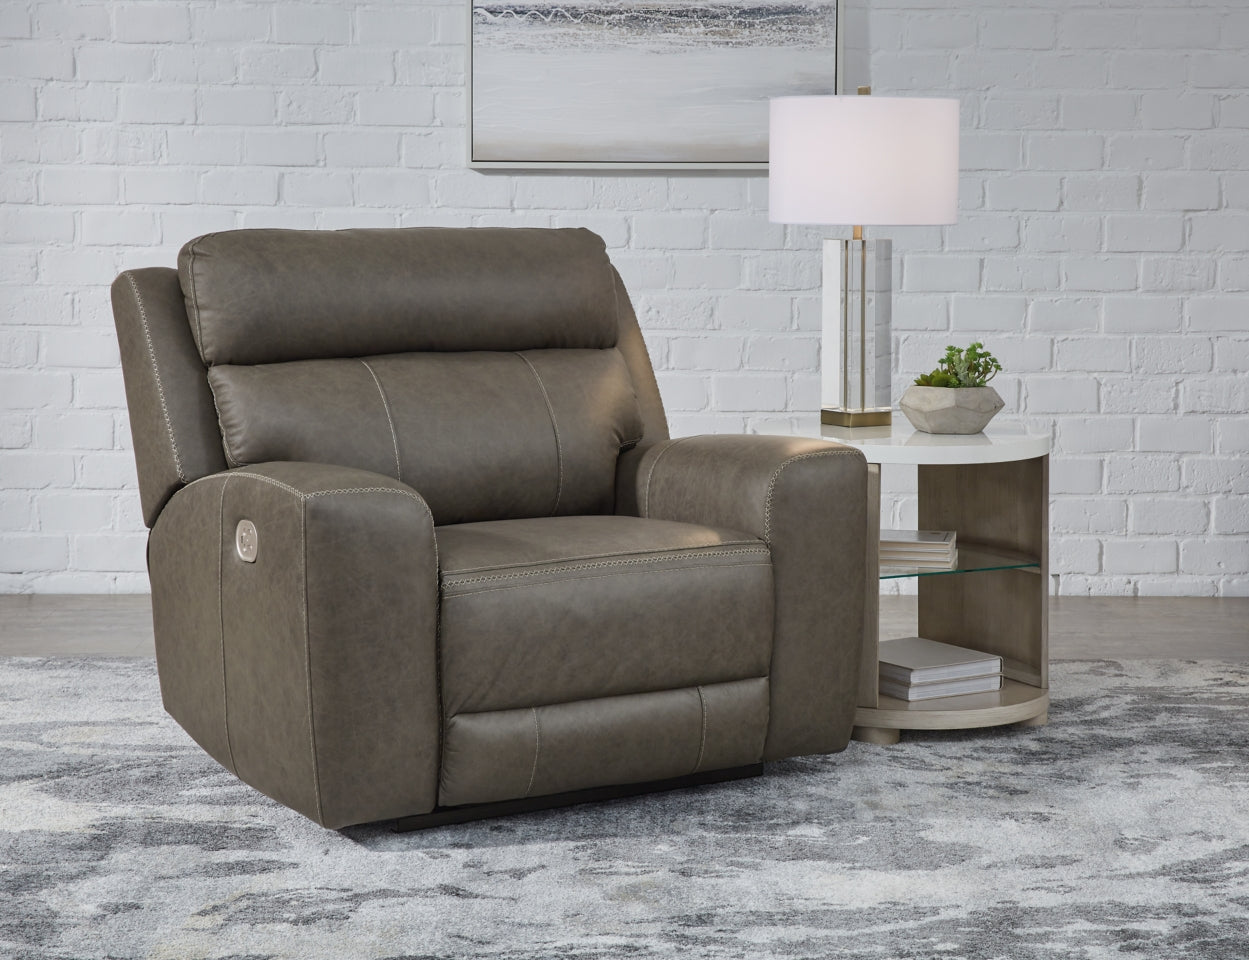 Roman Sofa, Loveseat and Recliner - furniture place usa